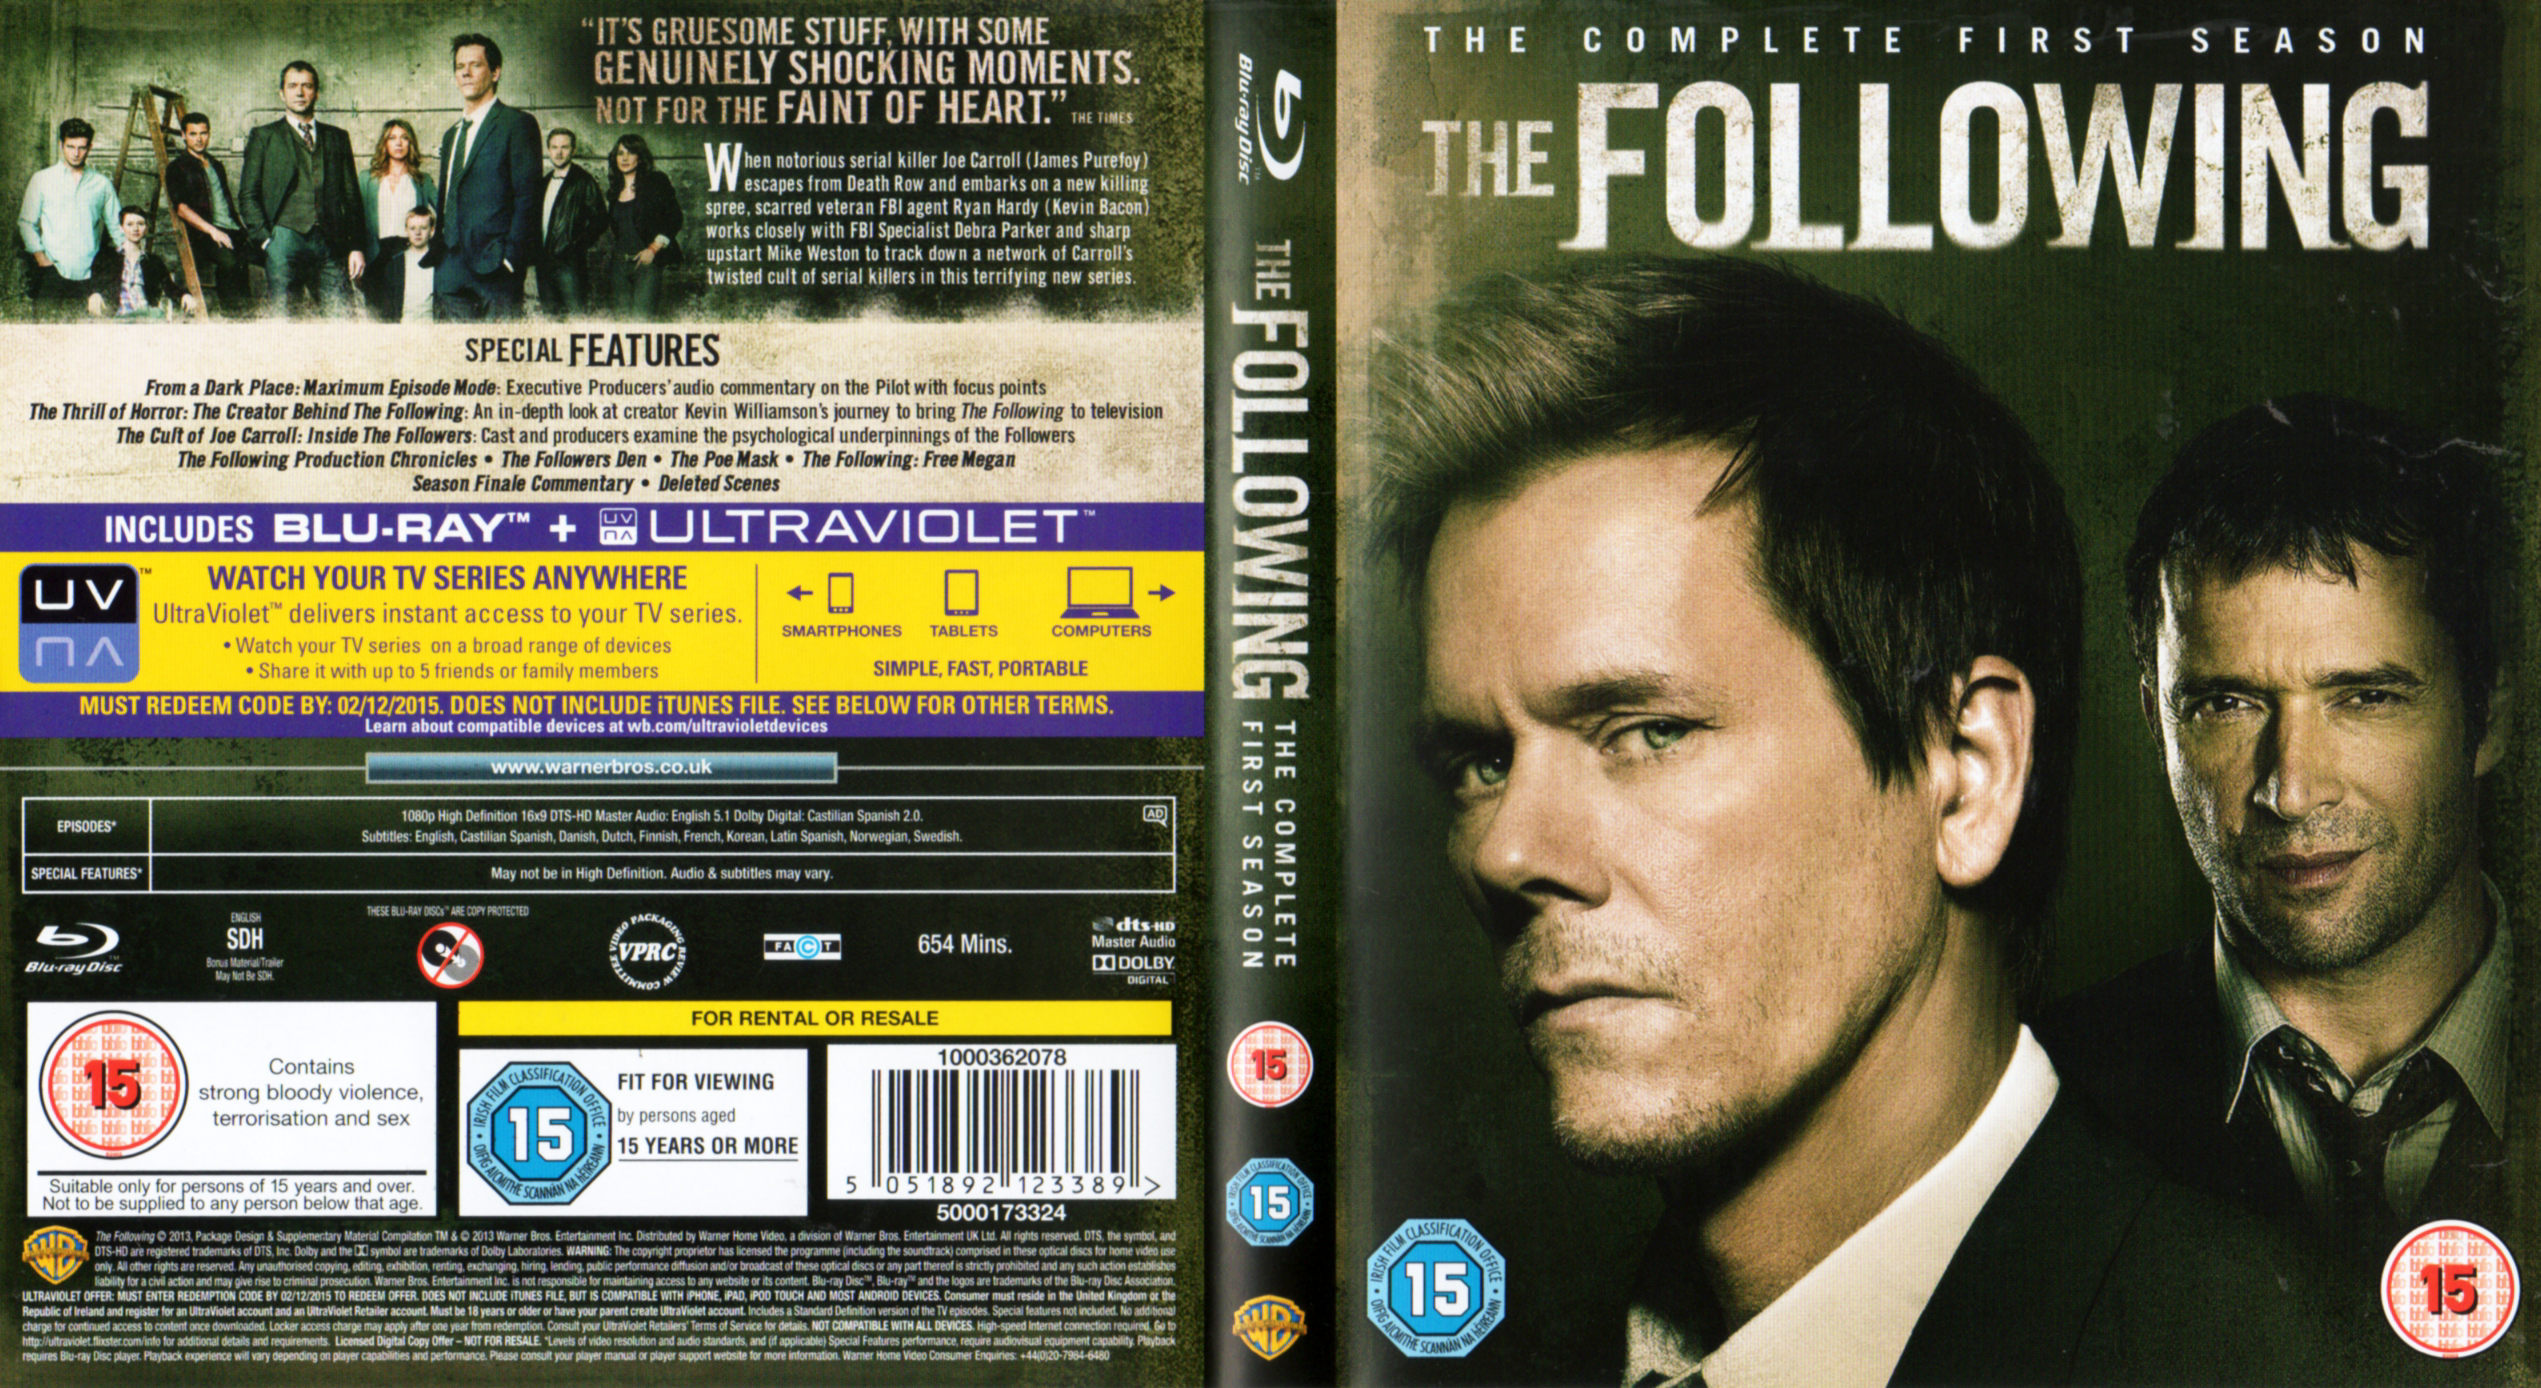 Jaquette DVD The following Saison 1 Zone 1 (BLU-RAY)